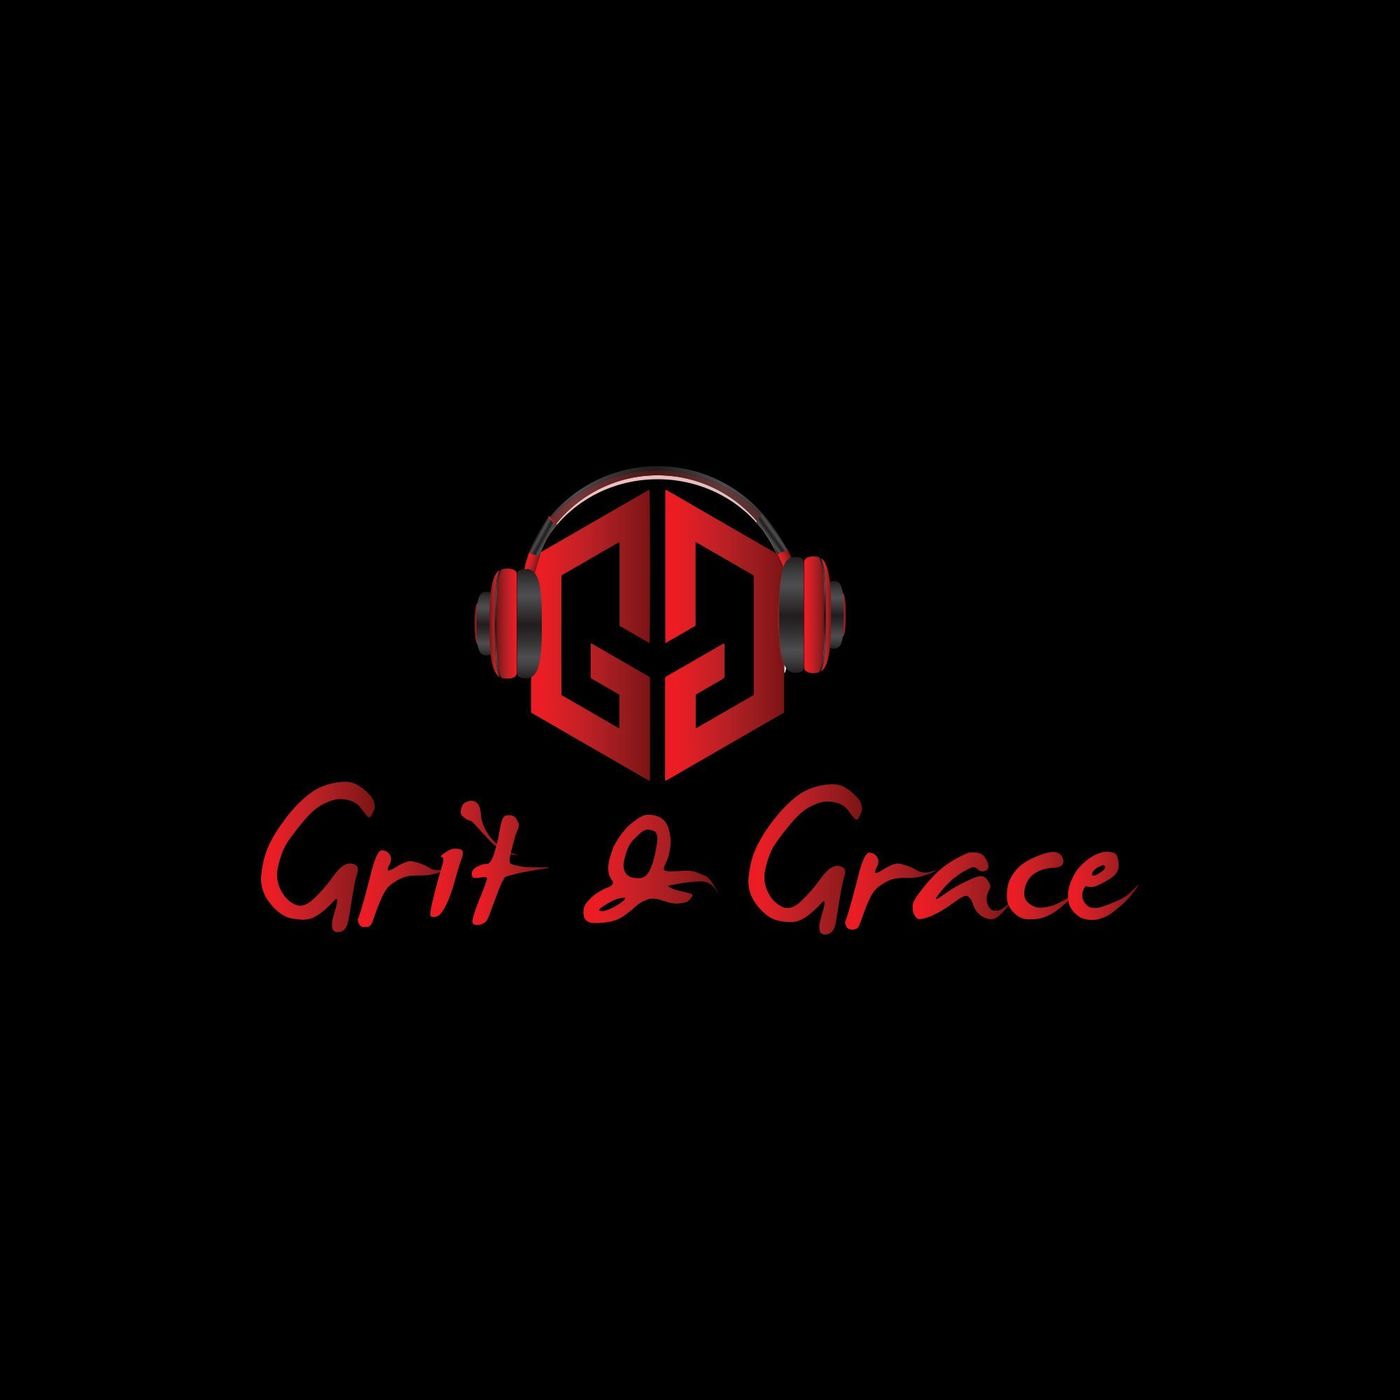 Grit and Grace: Marketing and Branding Tactics Image